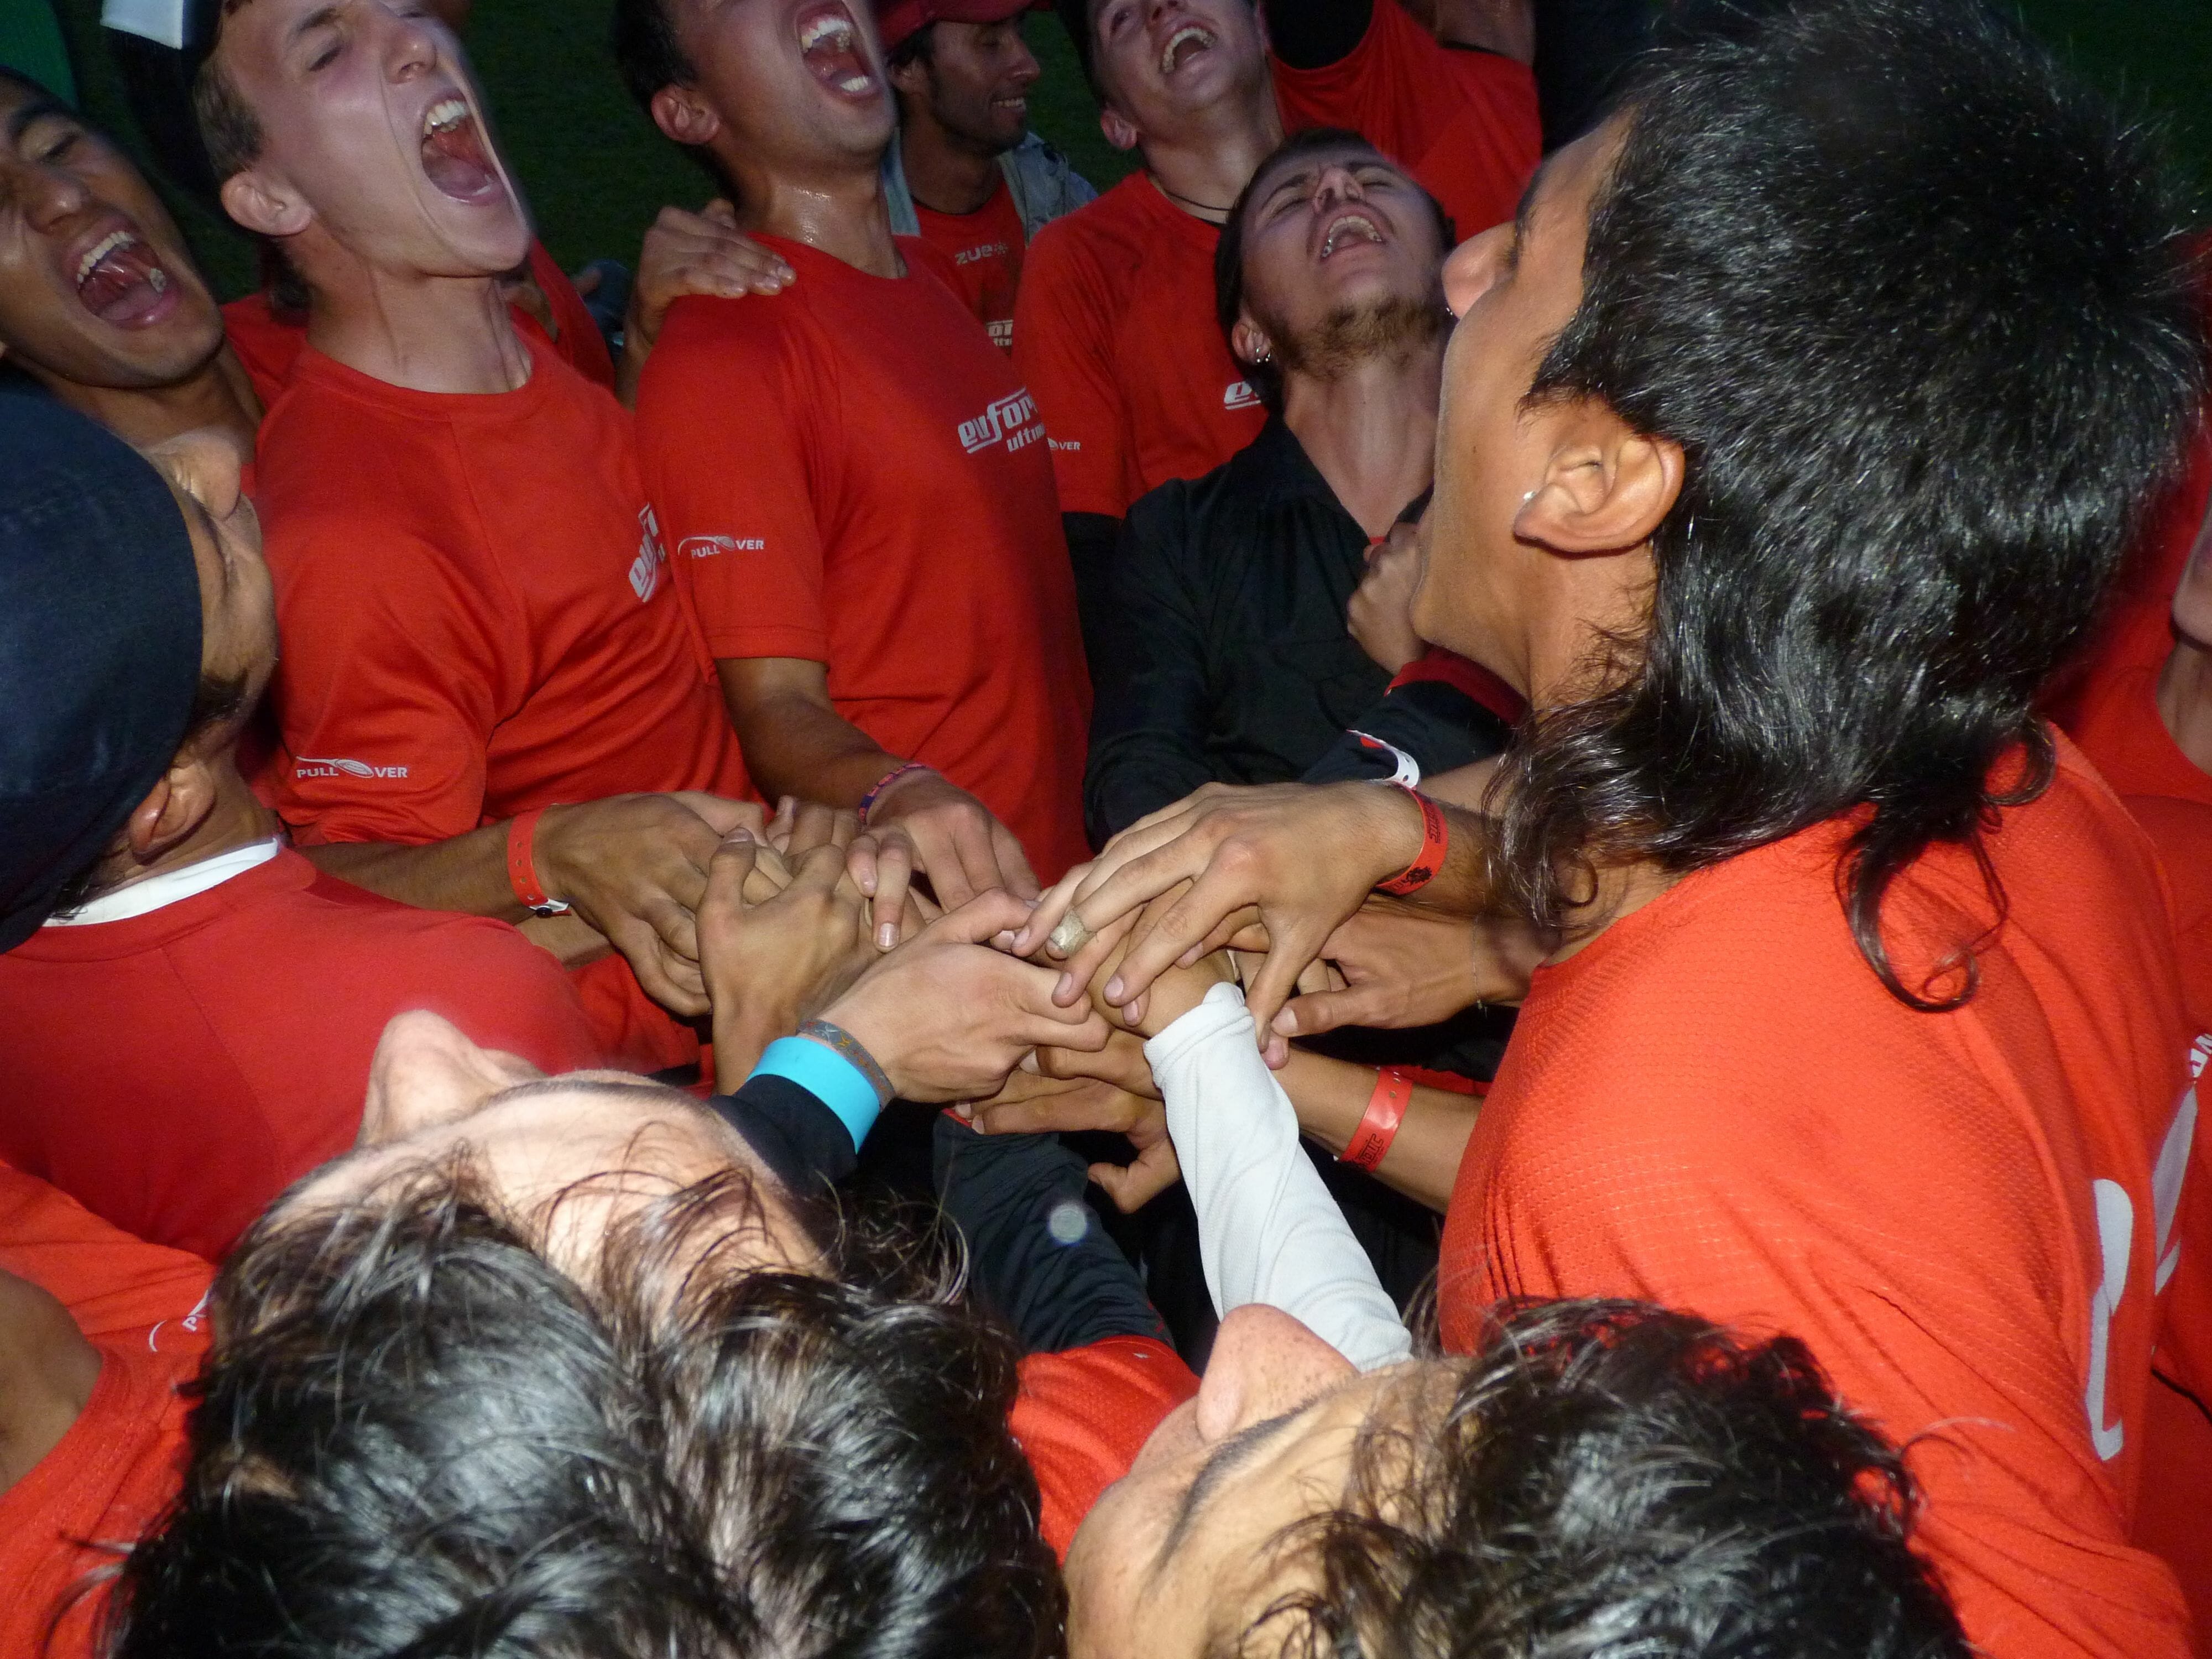 Euforia celebrates after winning the 2012 Colombian Nationals against Mamoots.